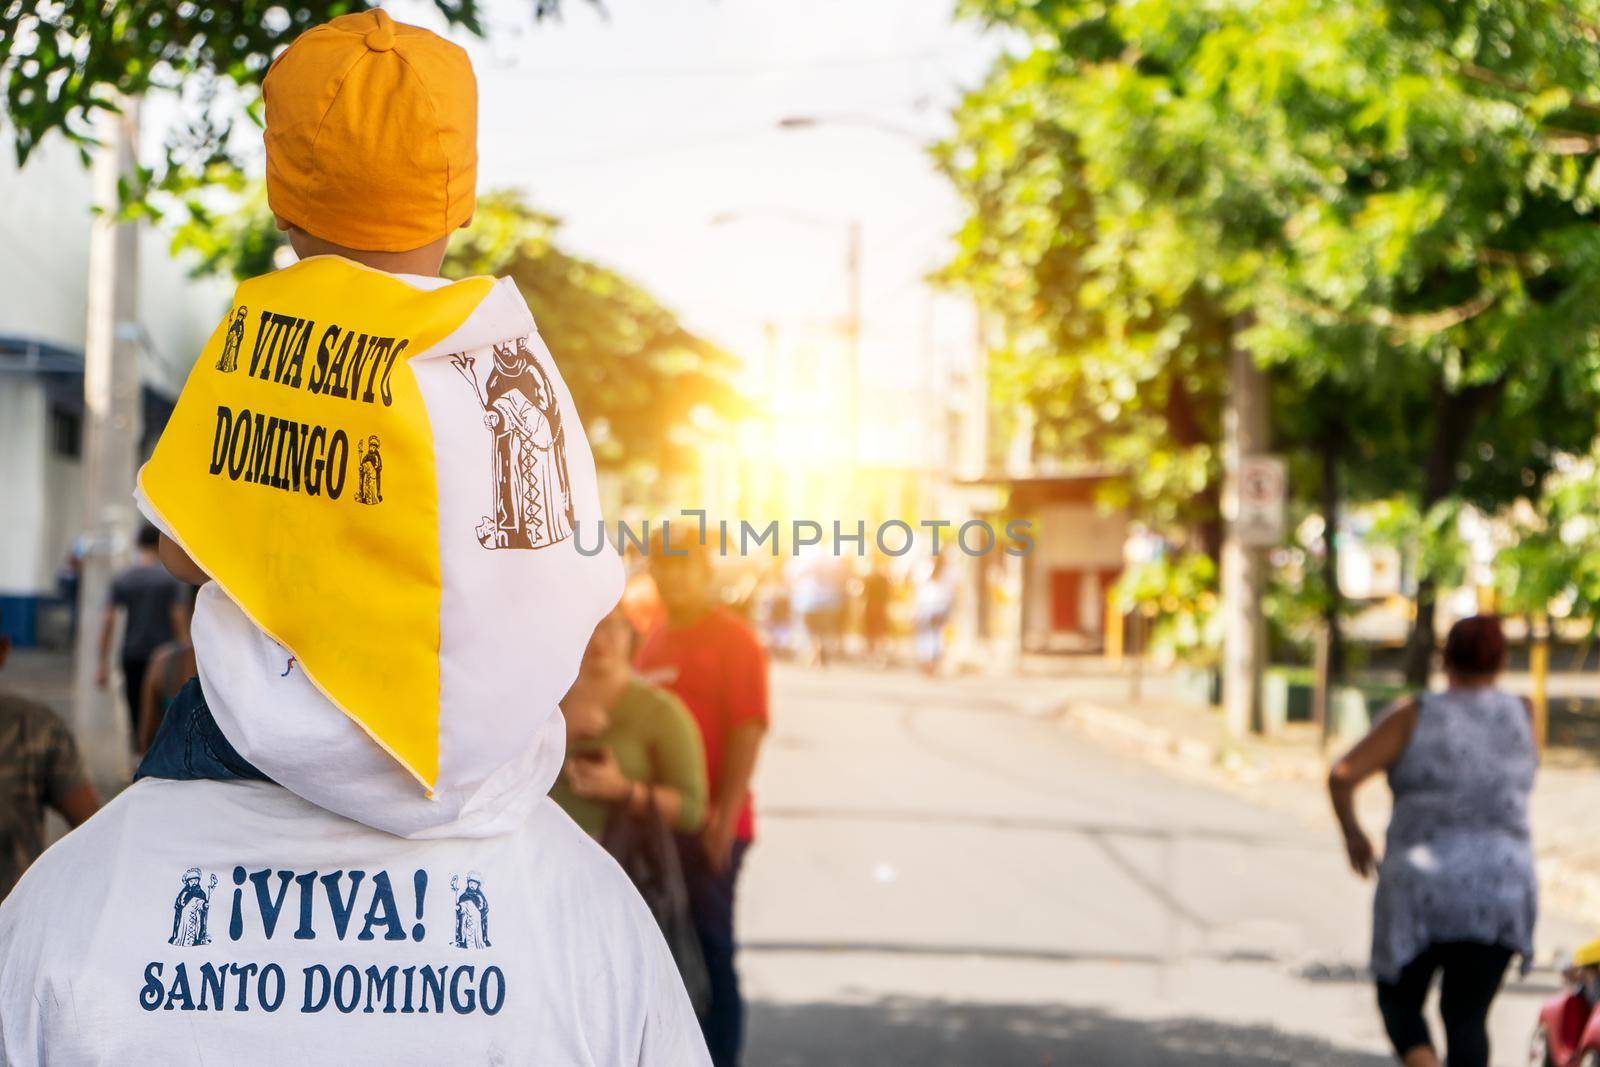 Unrecognizable man from behind carrying his grandson on his shoulders during the celebration of the traditional festivities in honor of Santo Domingo de Guzman, in Managua by cfalvarez